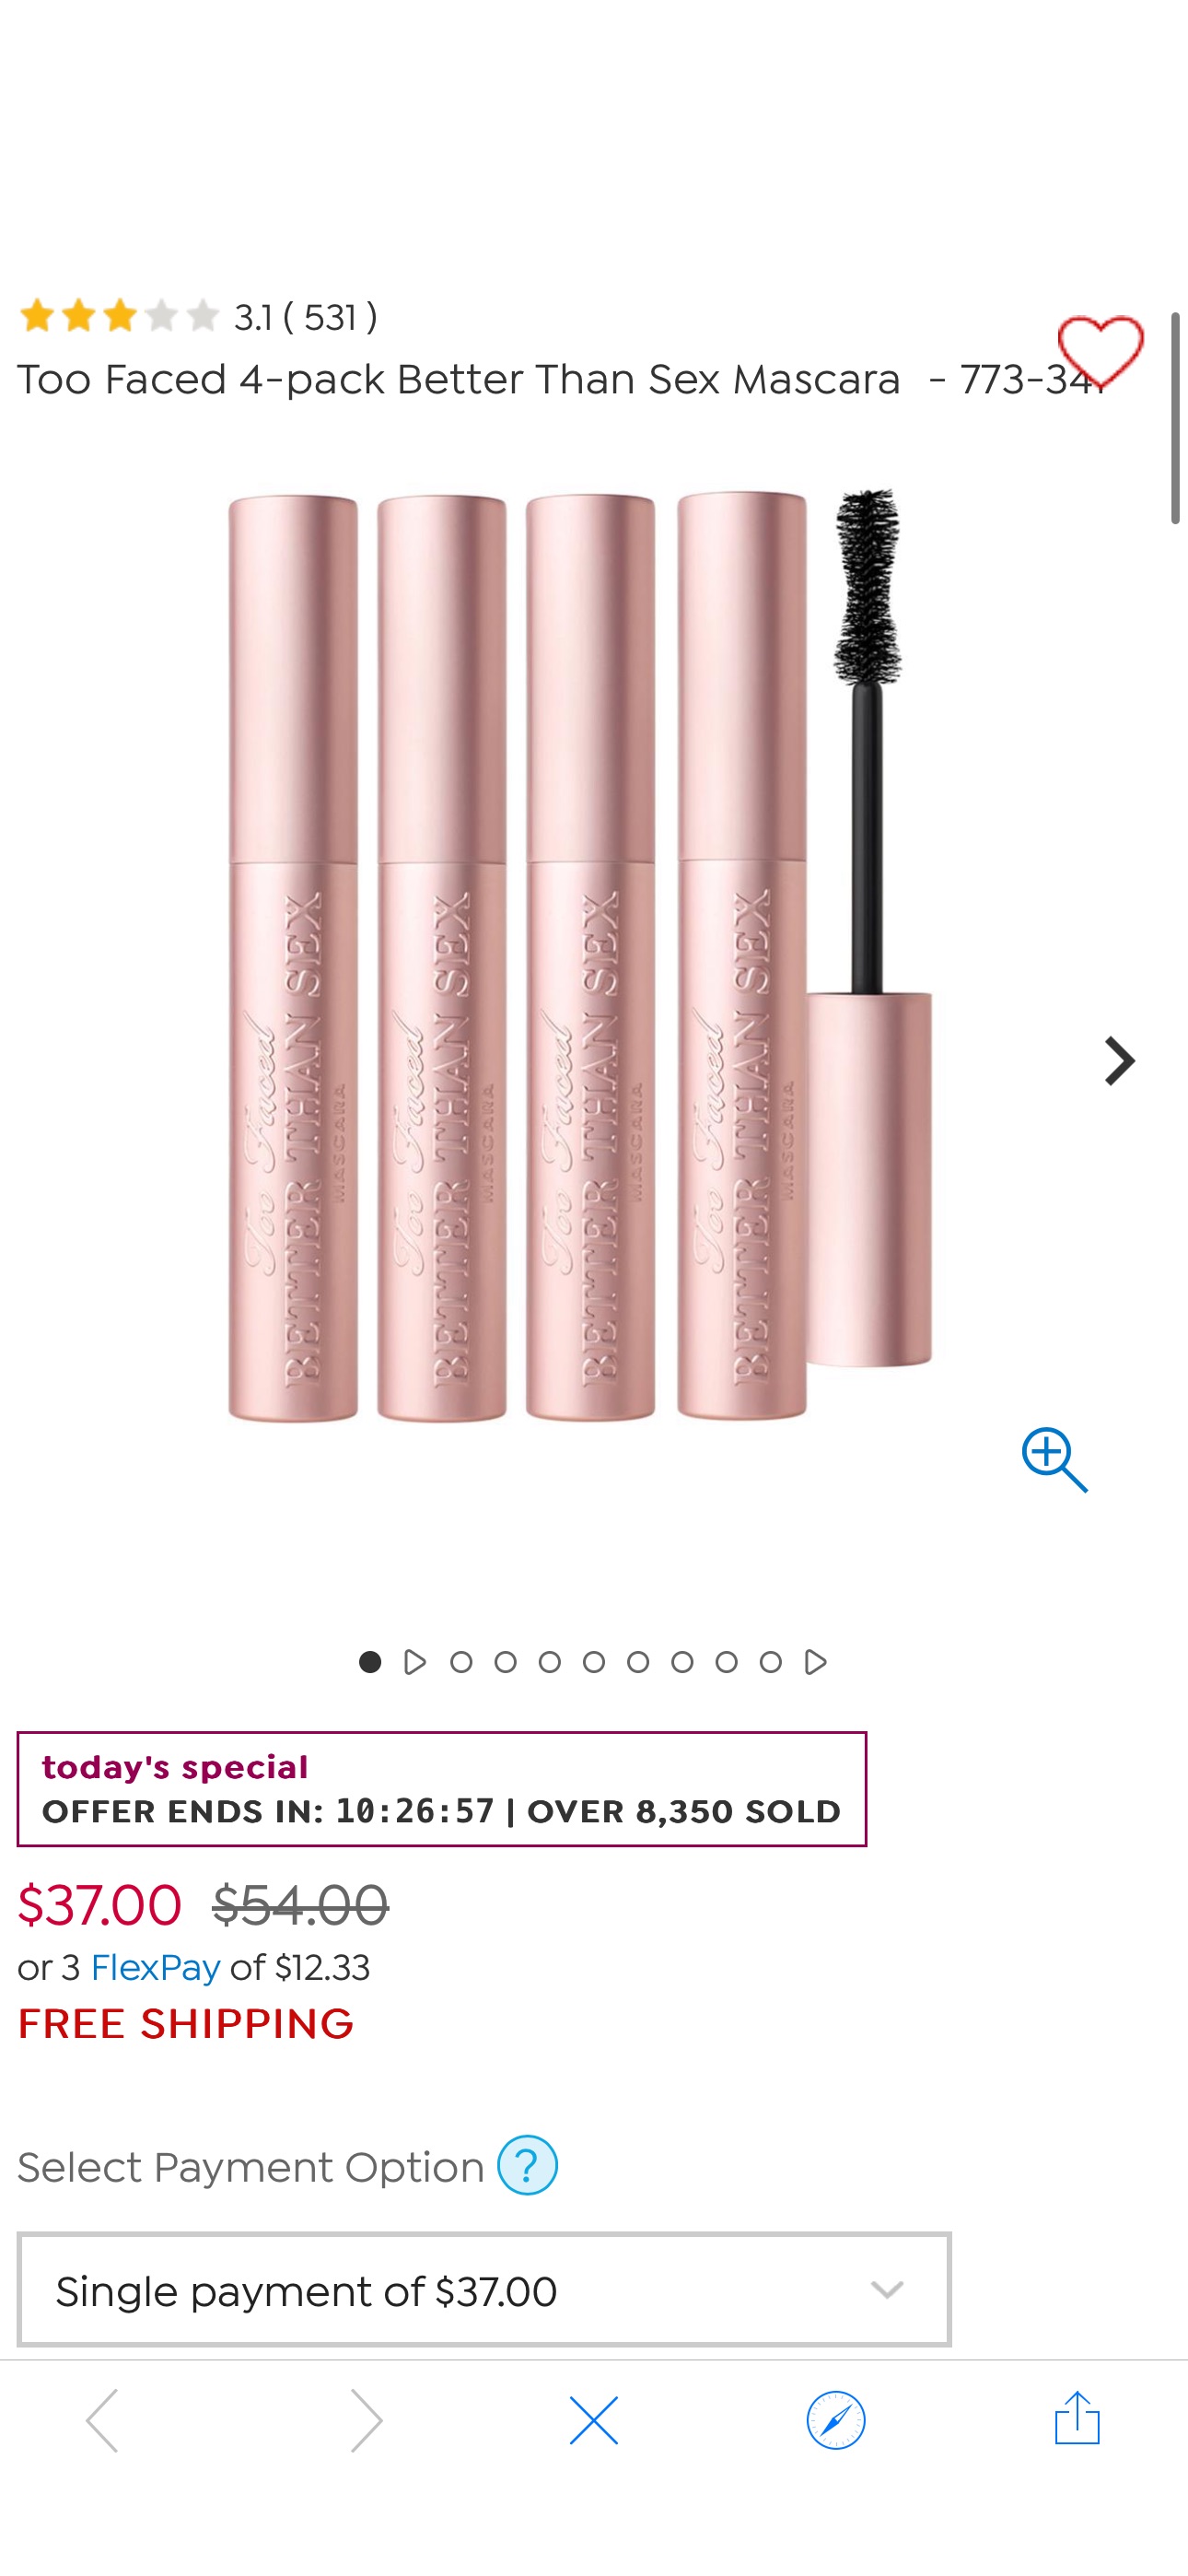 Too Faced 4-pack Better Than Sex Mascara - 20160932 | HSN $27 Too Faced 4-pack Better Than Sex Mascara - 
$116 Value 
New account and use code HSN2024